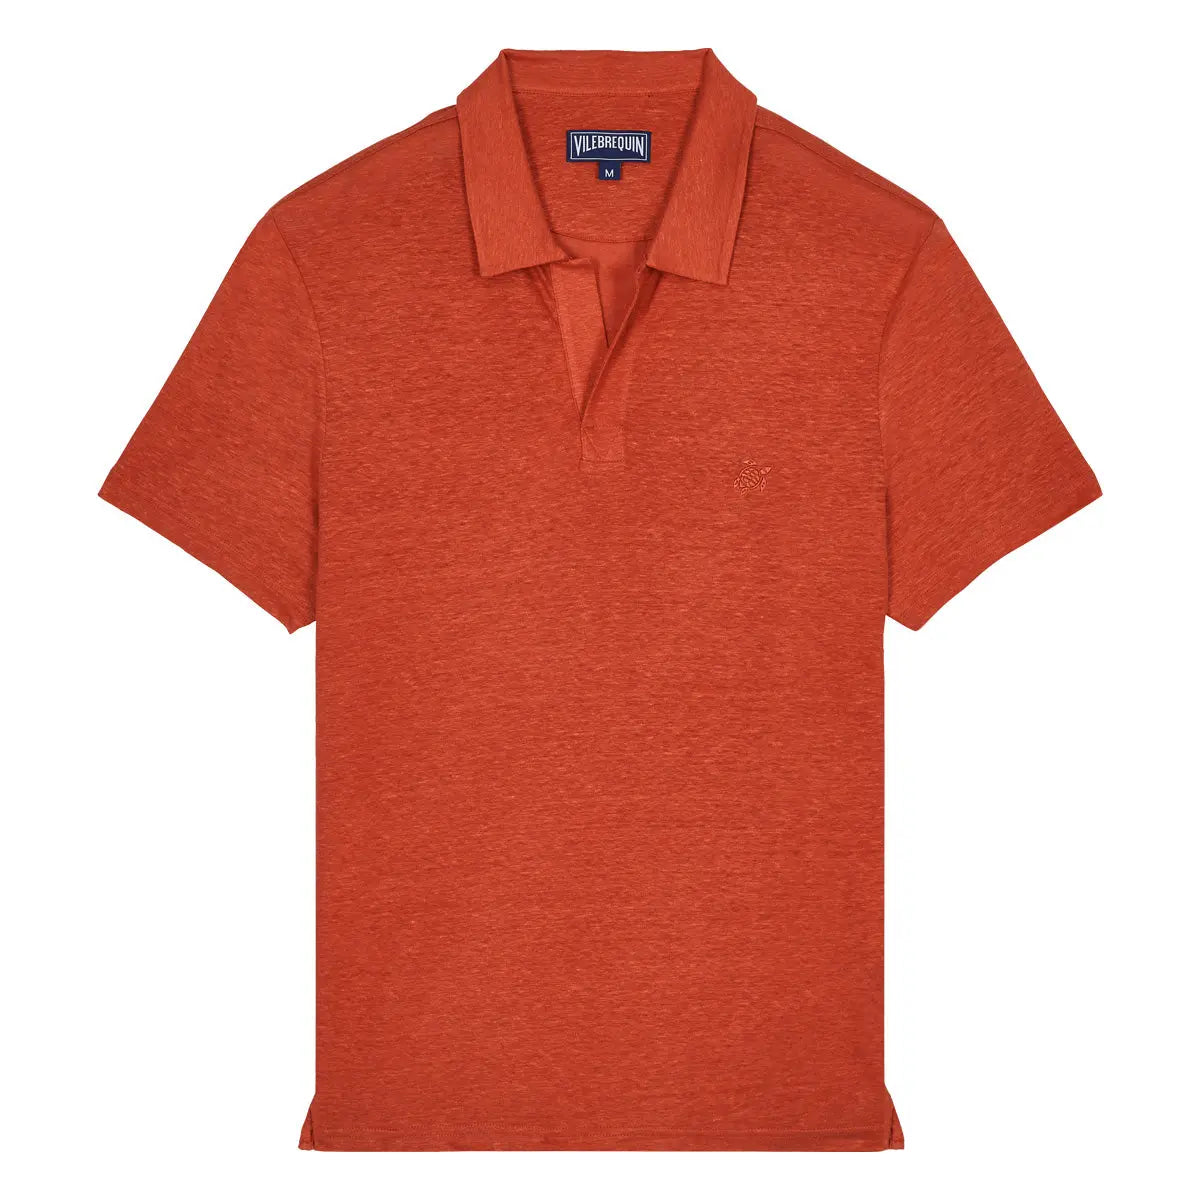 Tomette Red Linen Pyramid Polo Shirt  Vilebrequin   